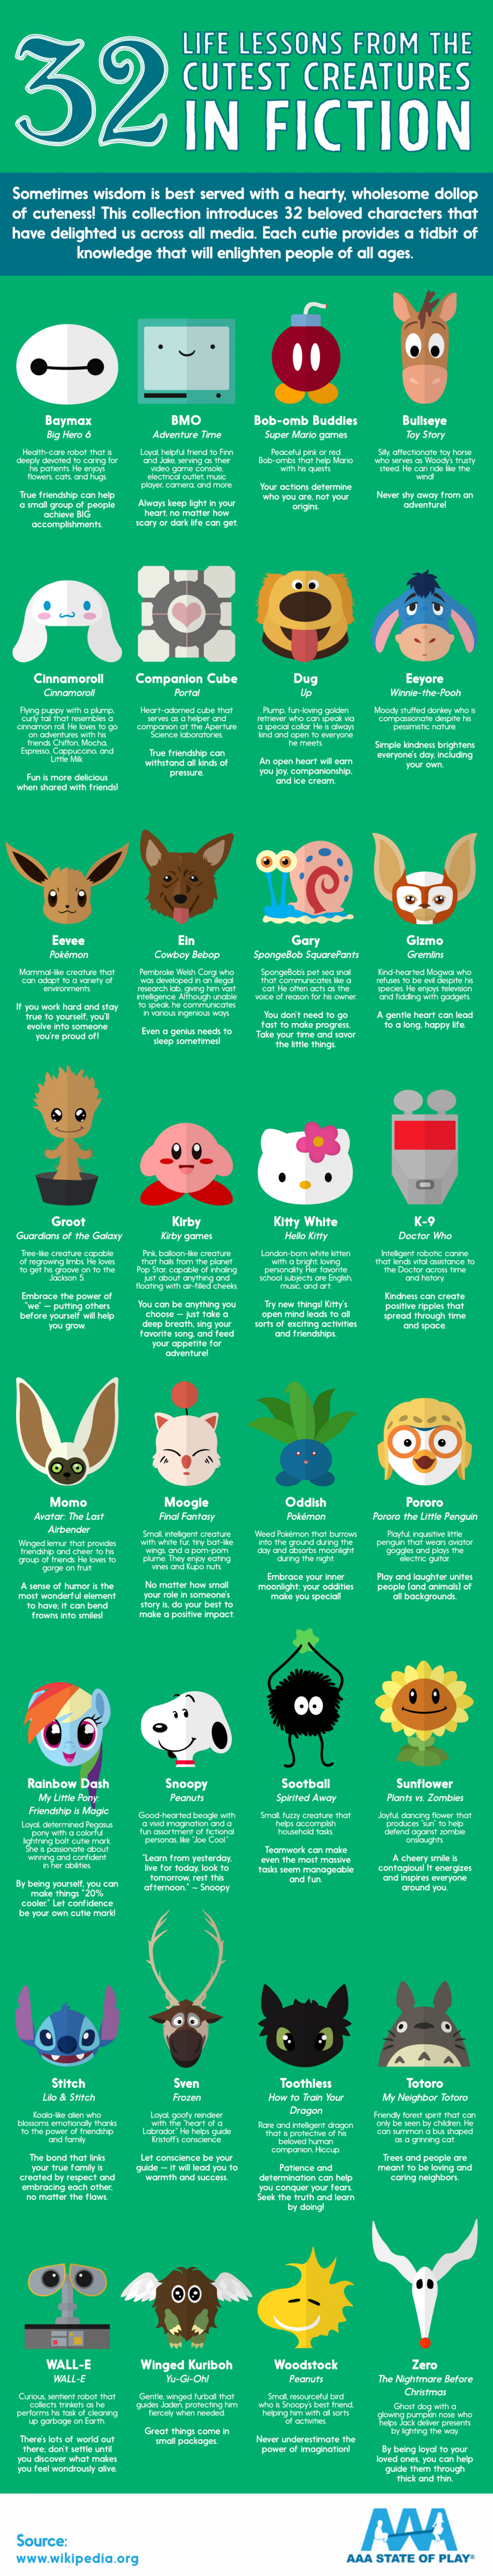 32 Life Lessons From the Cutest Creatures in Fiction  Infographic